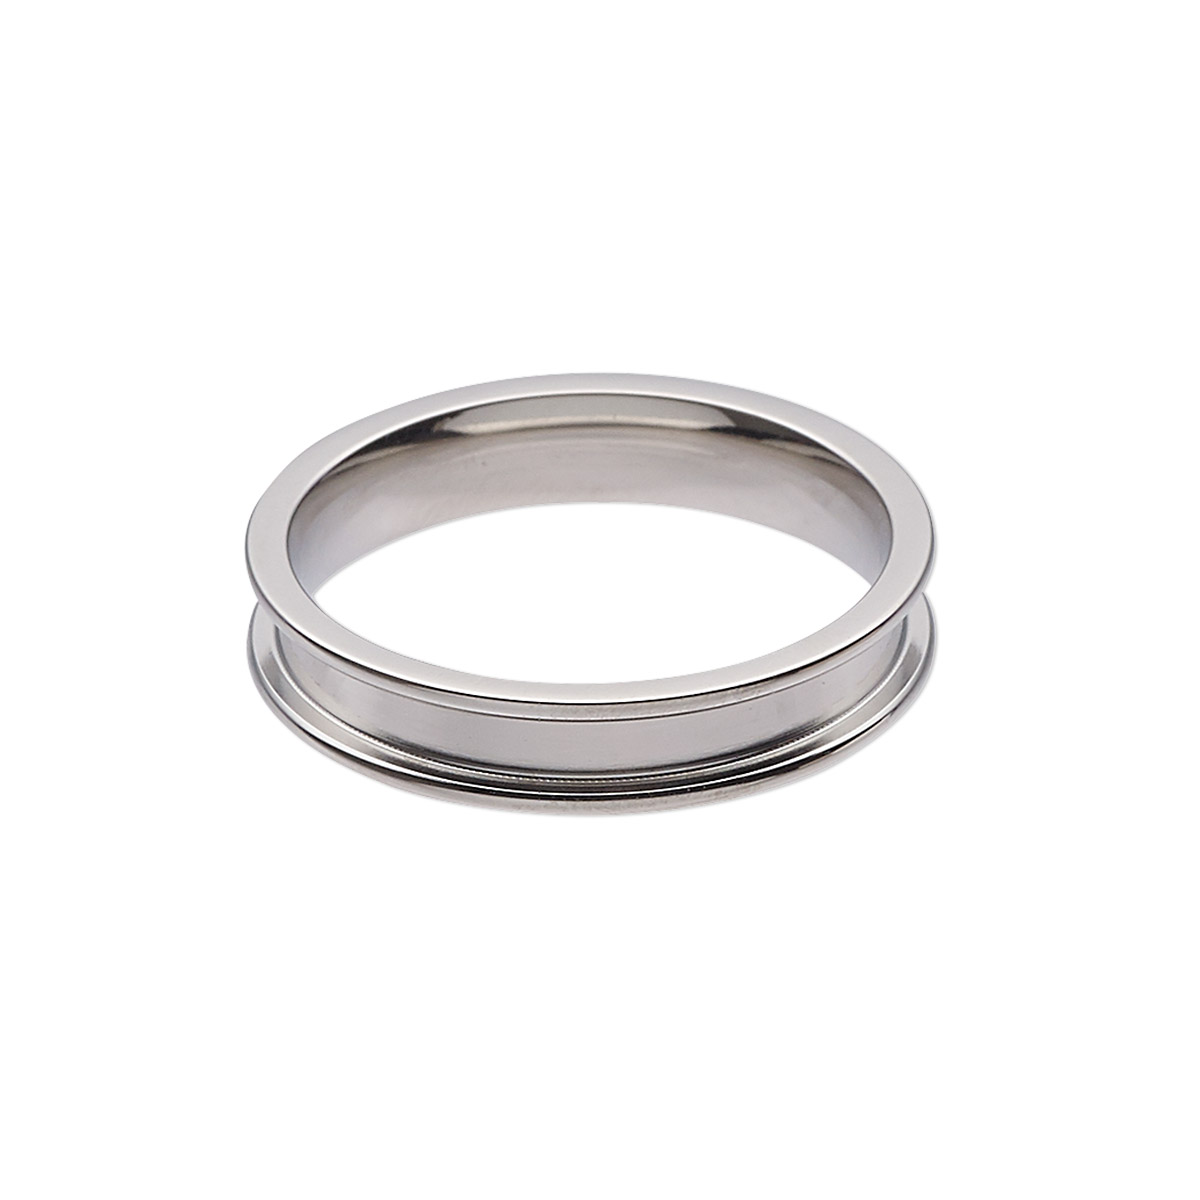 Ring, stainless steel, 5mm wide band with 2.9mm wide channel, size 12 ...